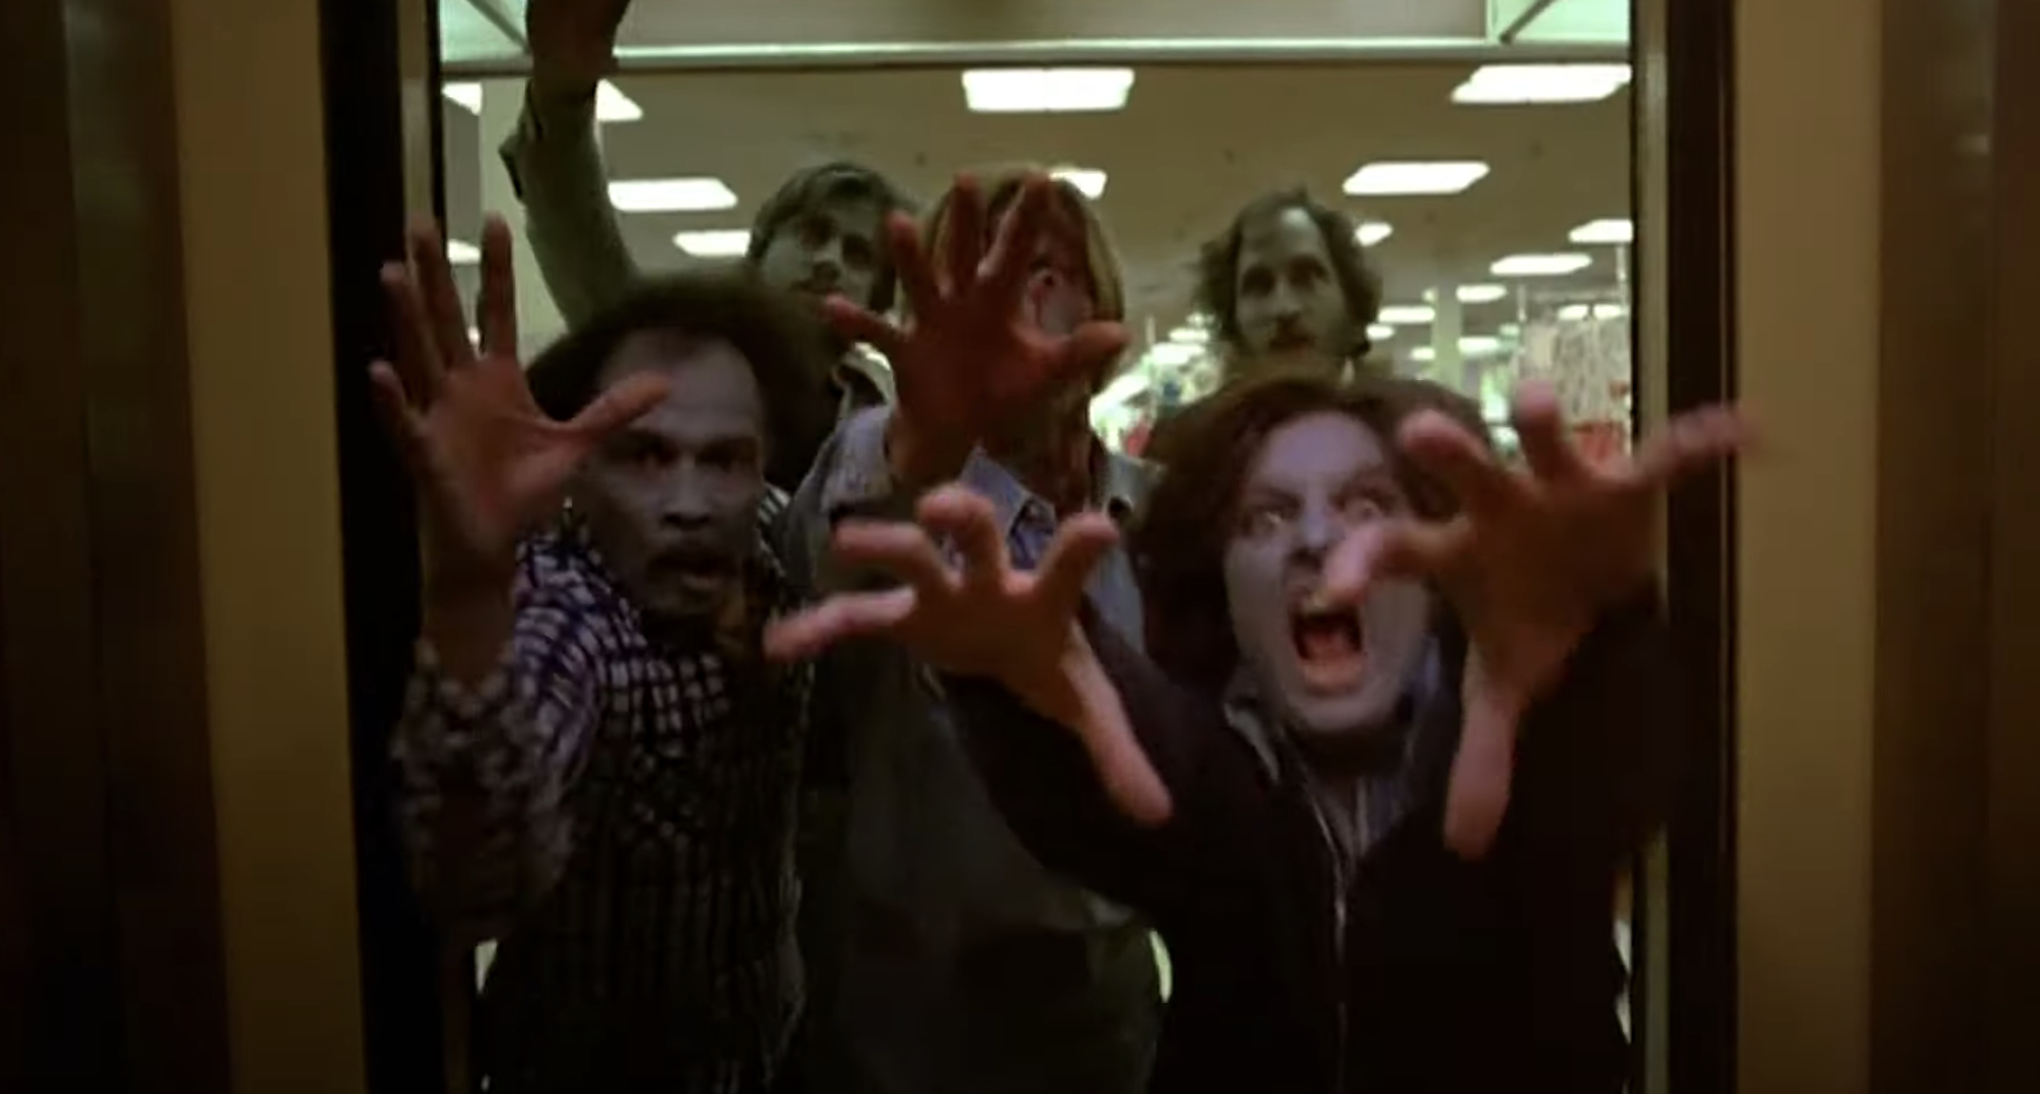 A group of zombies lunge forward with outstretched hands